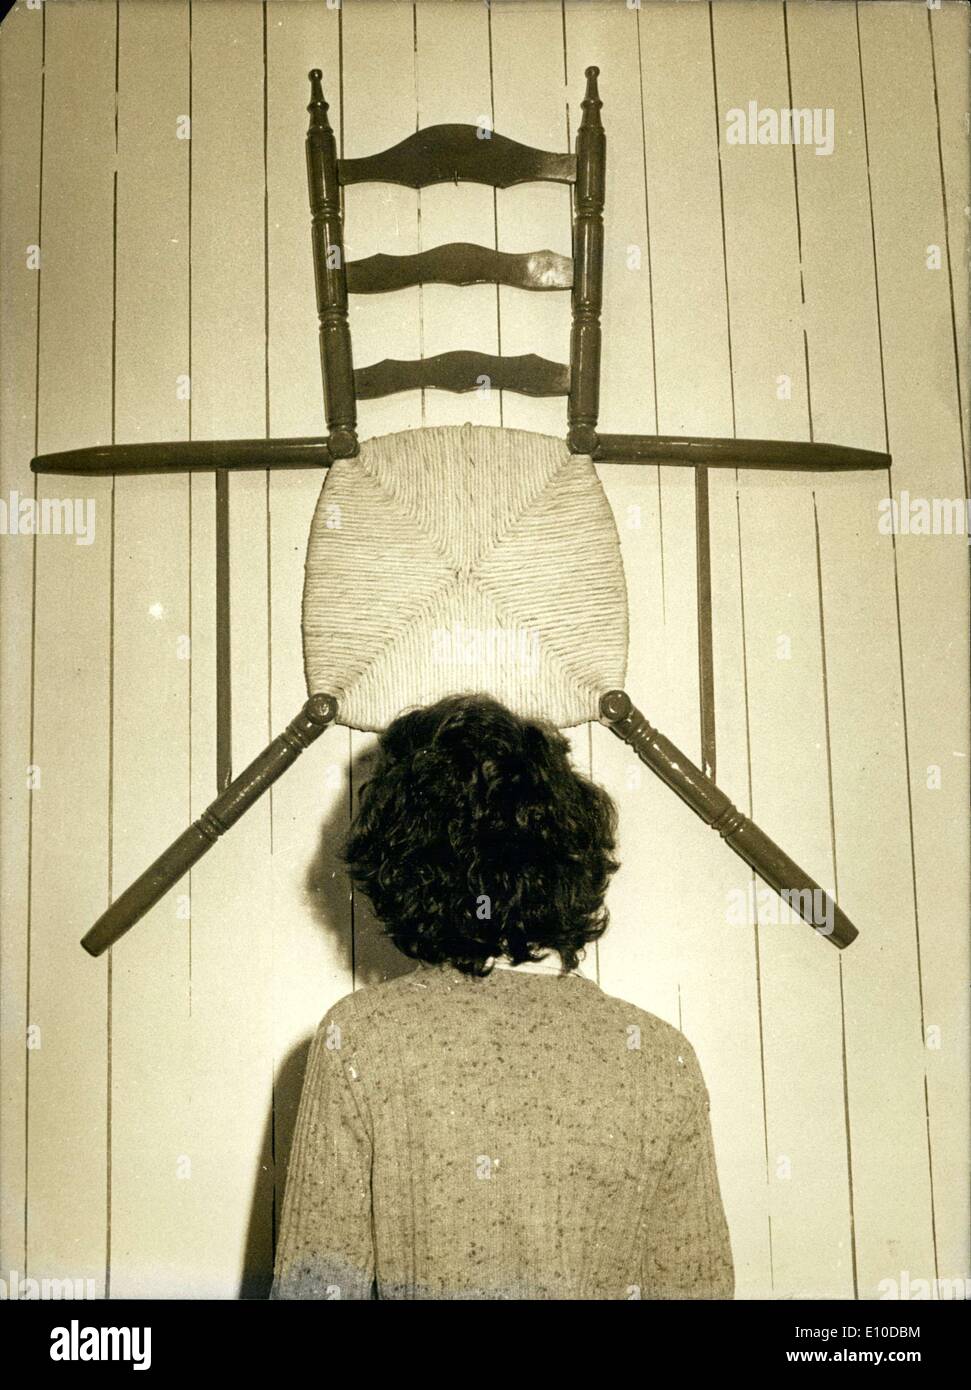 Apr. 28, 1972 - Chair Nailed Flat to a Wall at Modern Art Museum Stock Photo